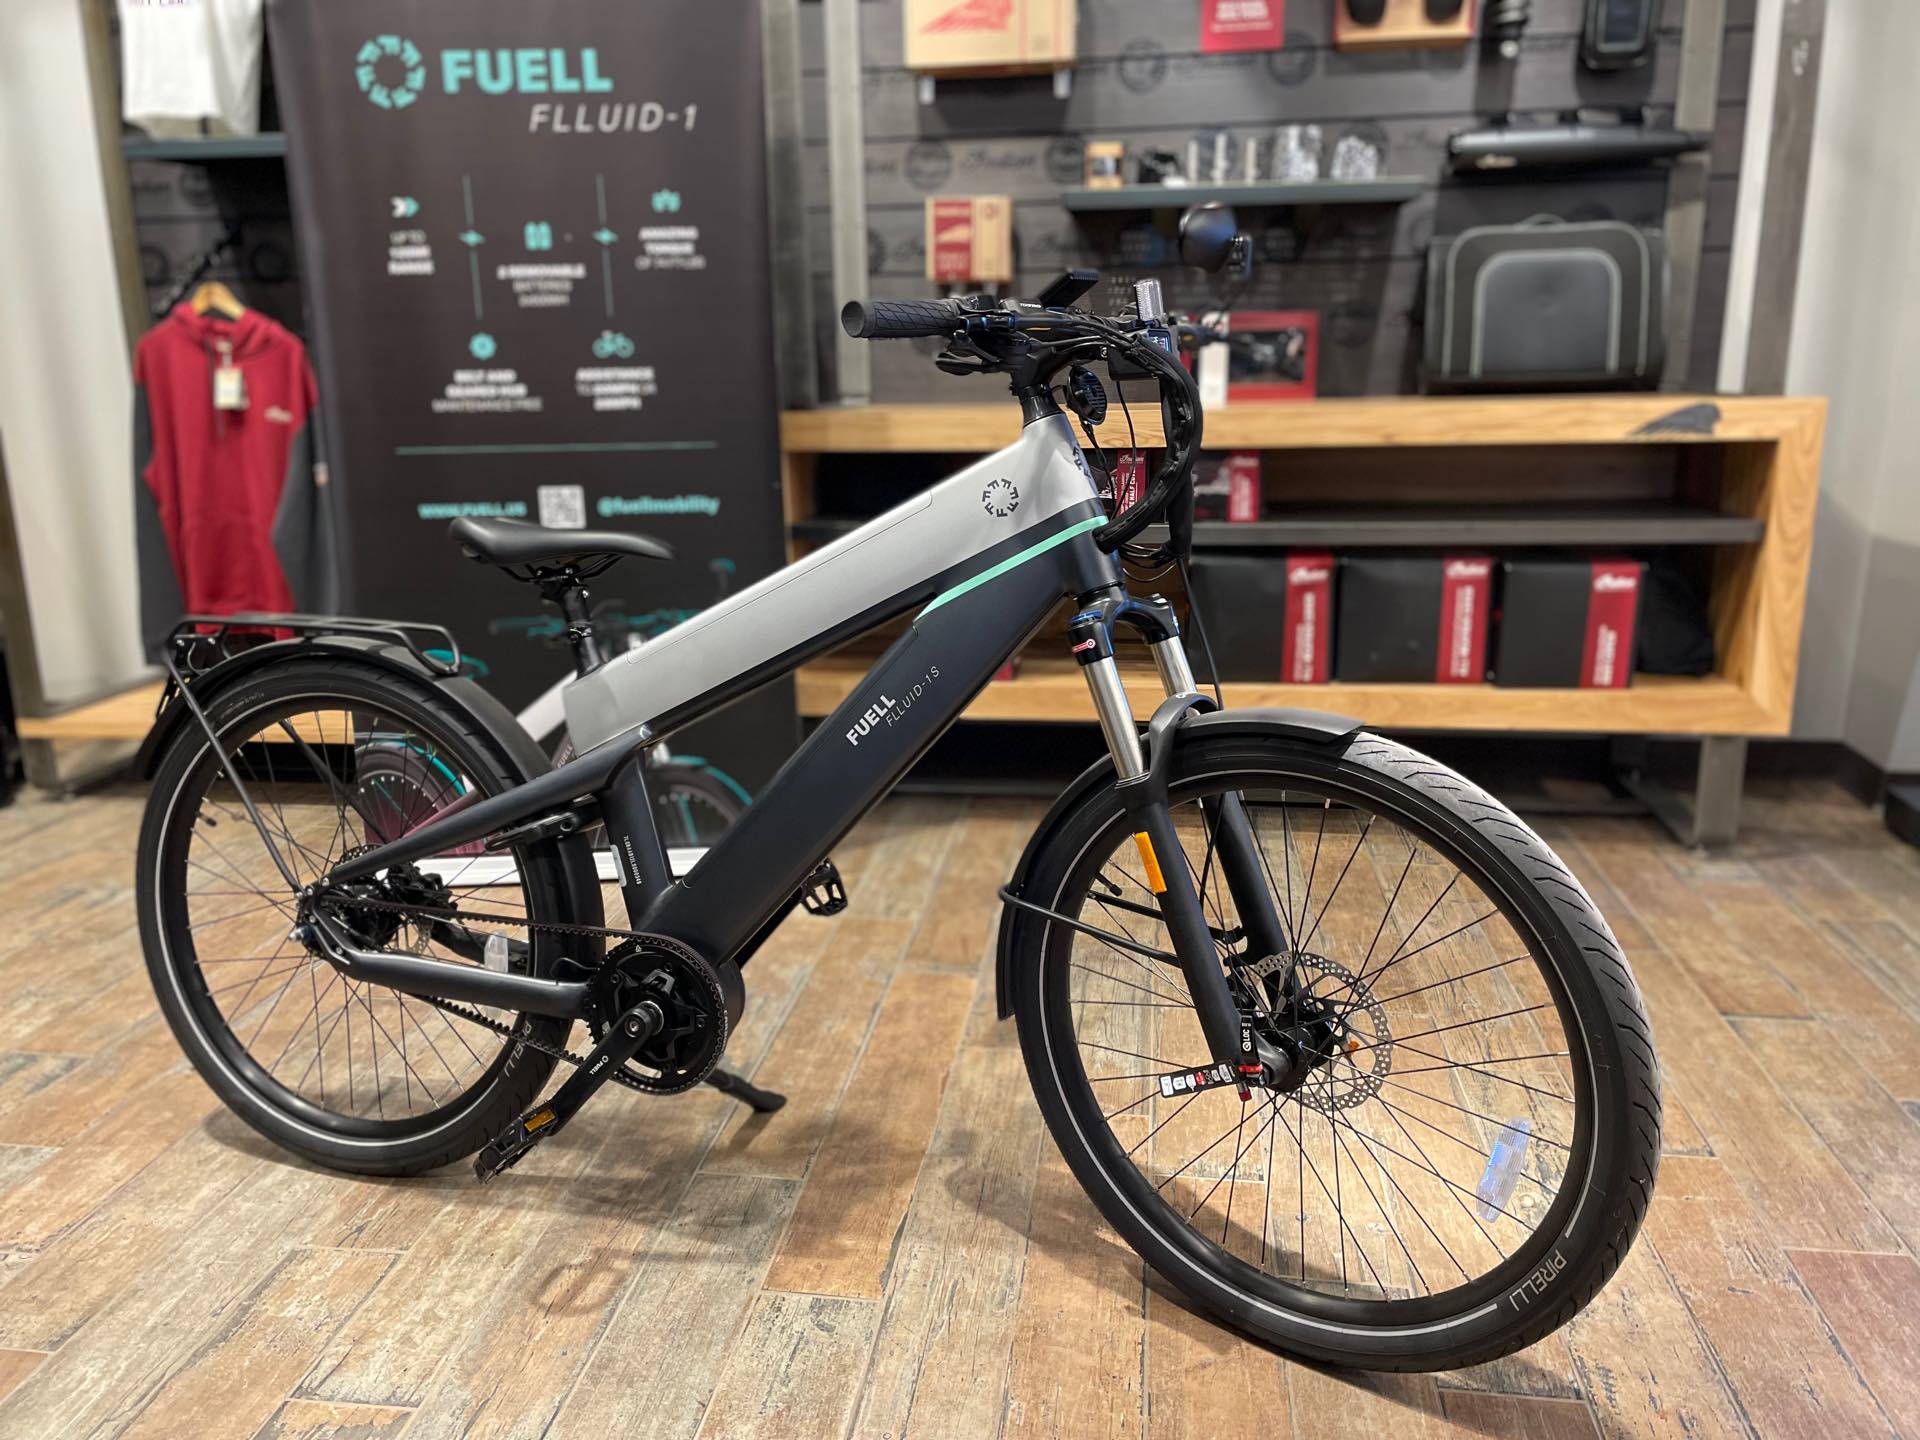 2021 Fuell Fuell 1S DK GY - MED at Pitt Cycles